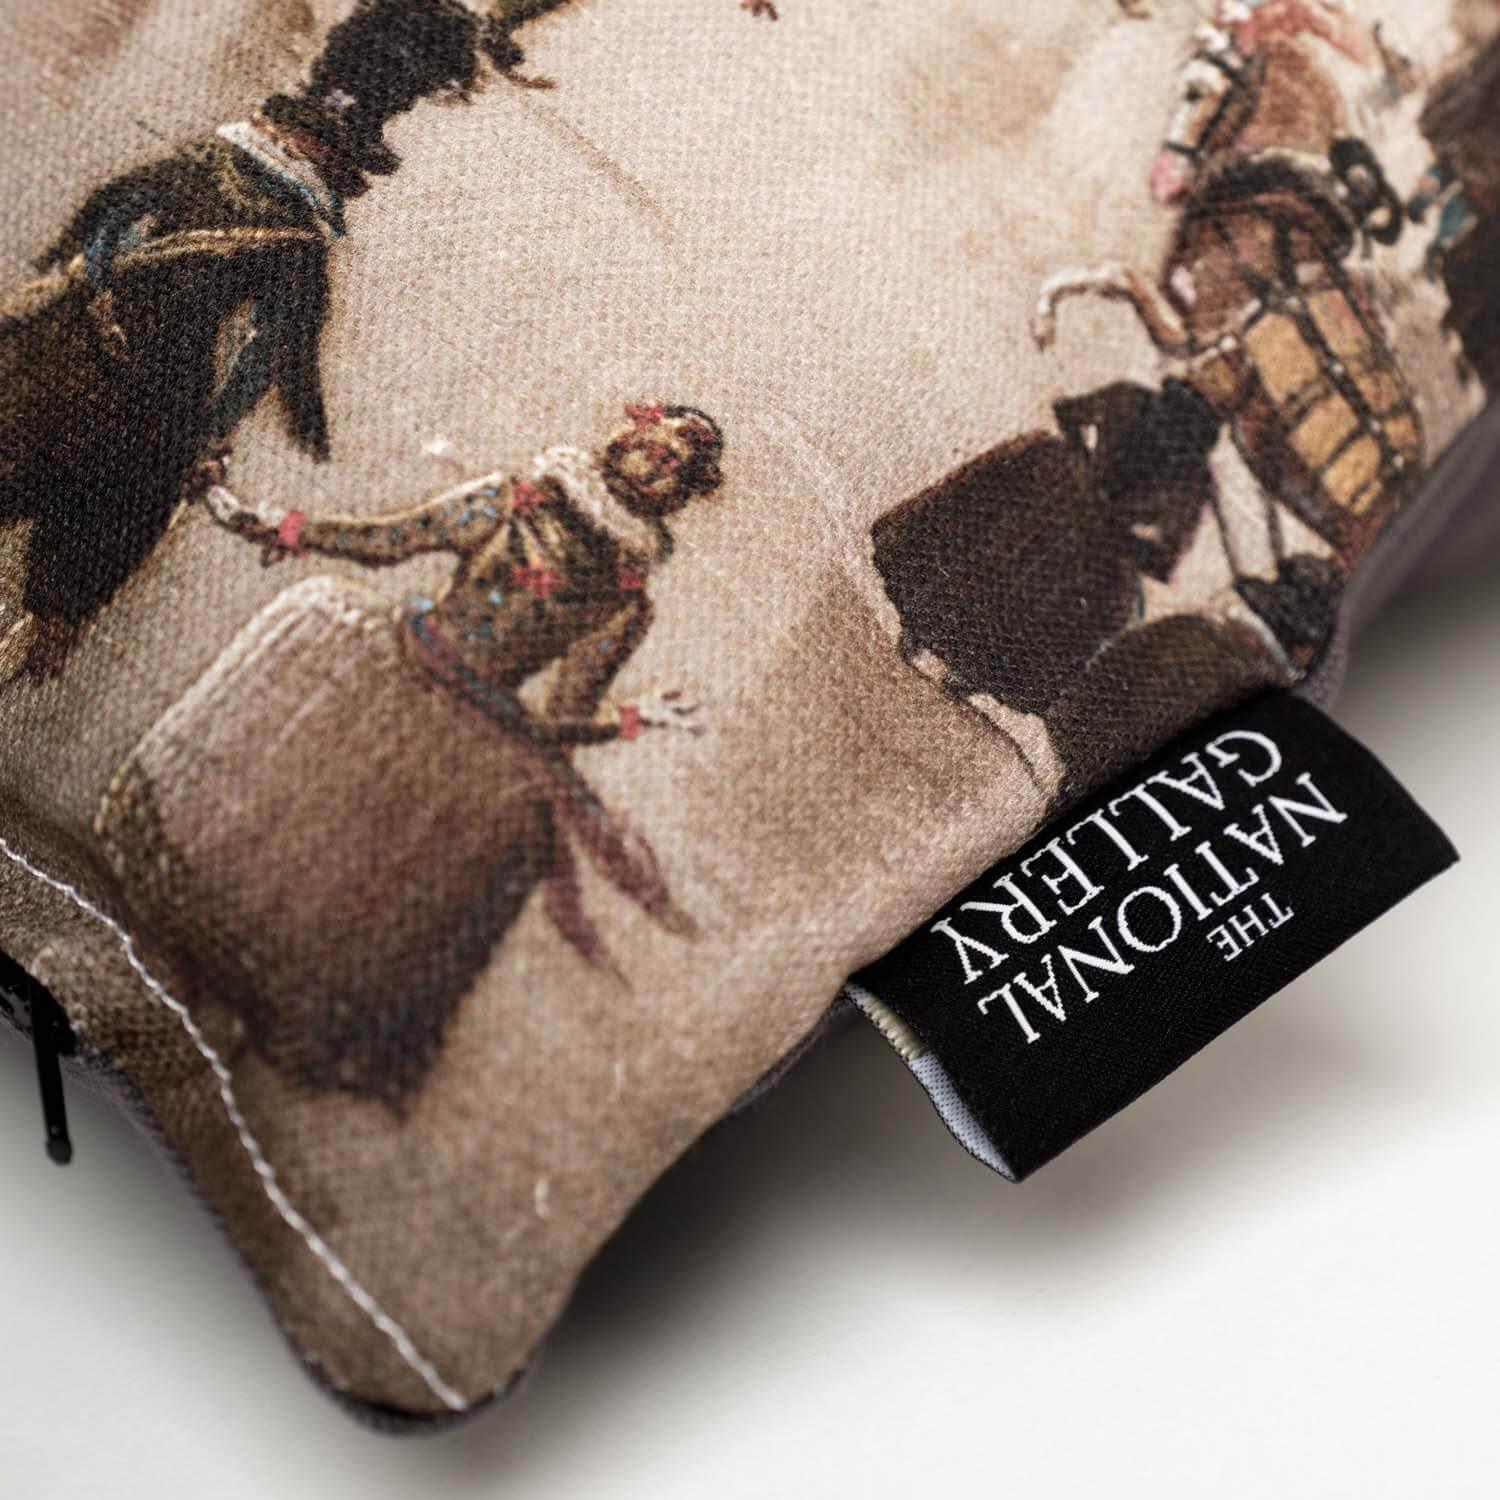 Portrait of a Lady - Alesso Baldovinetti’s -National Gallery Cushion - Handmade Cushions UK - WeLoveCushions